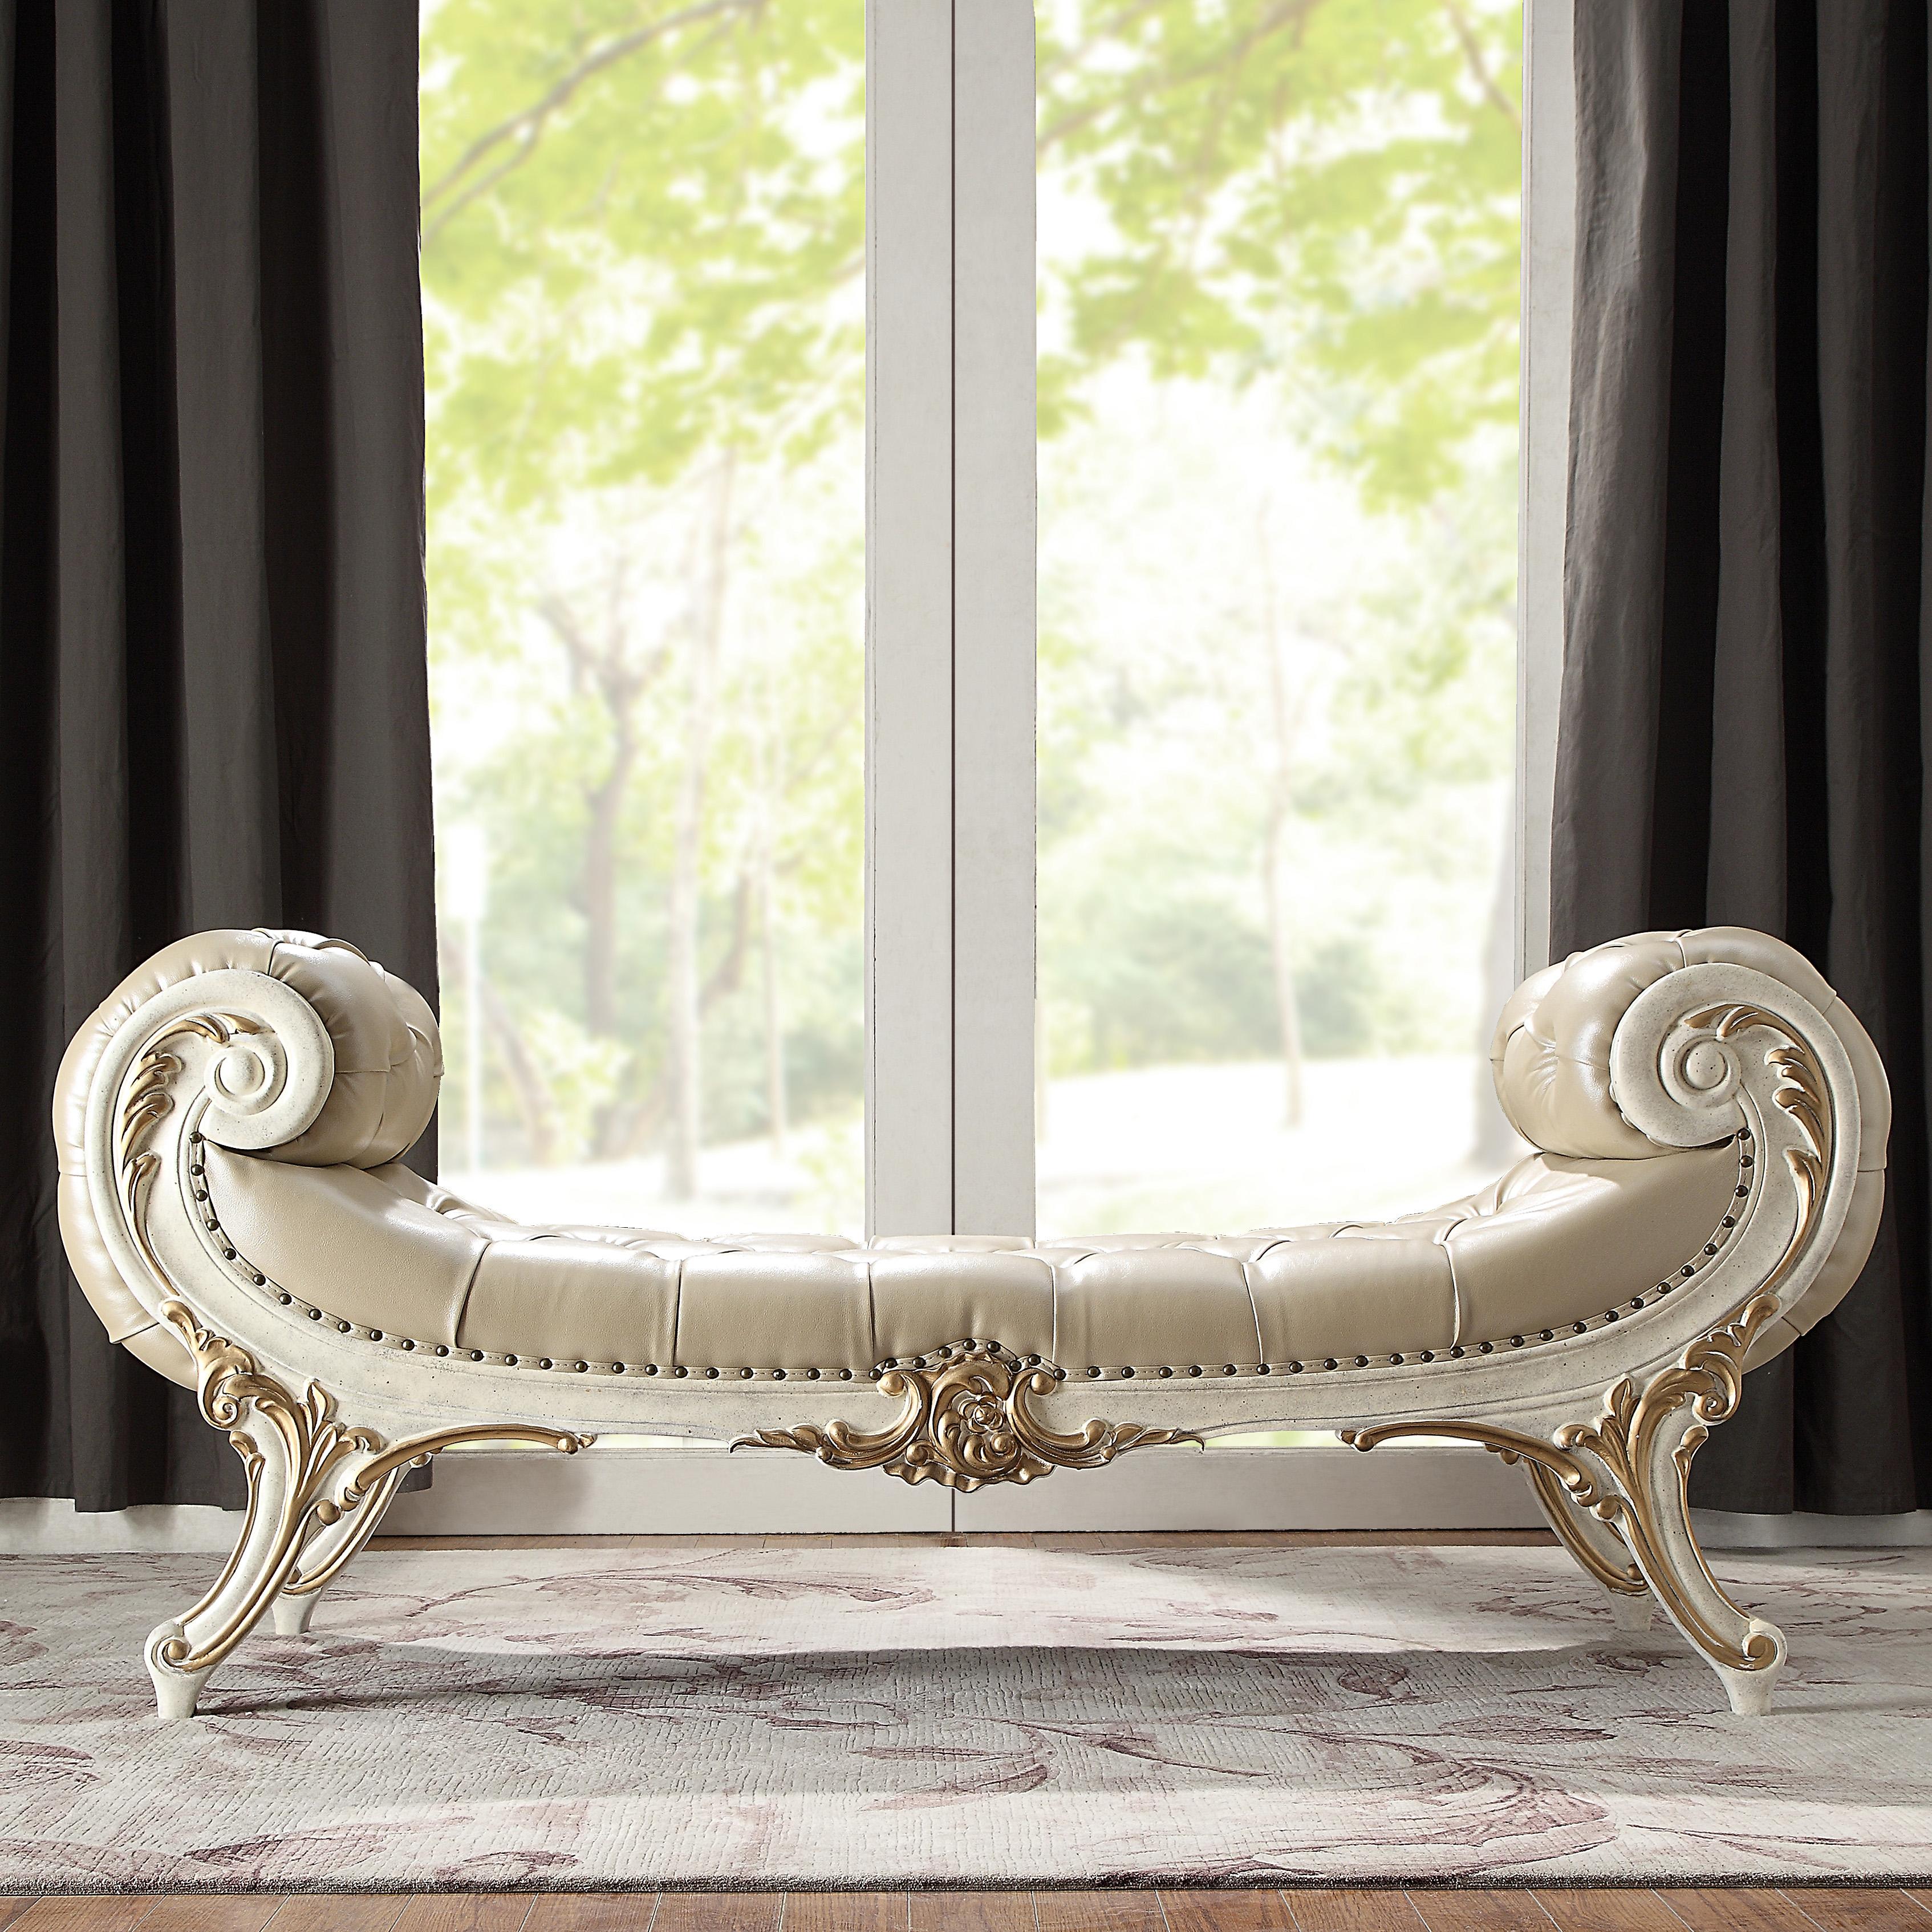 

    
Luxury Tufted Bench  White Carved Wood Traditional Homey Design HD-8030
